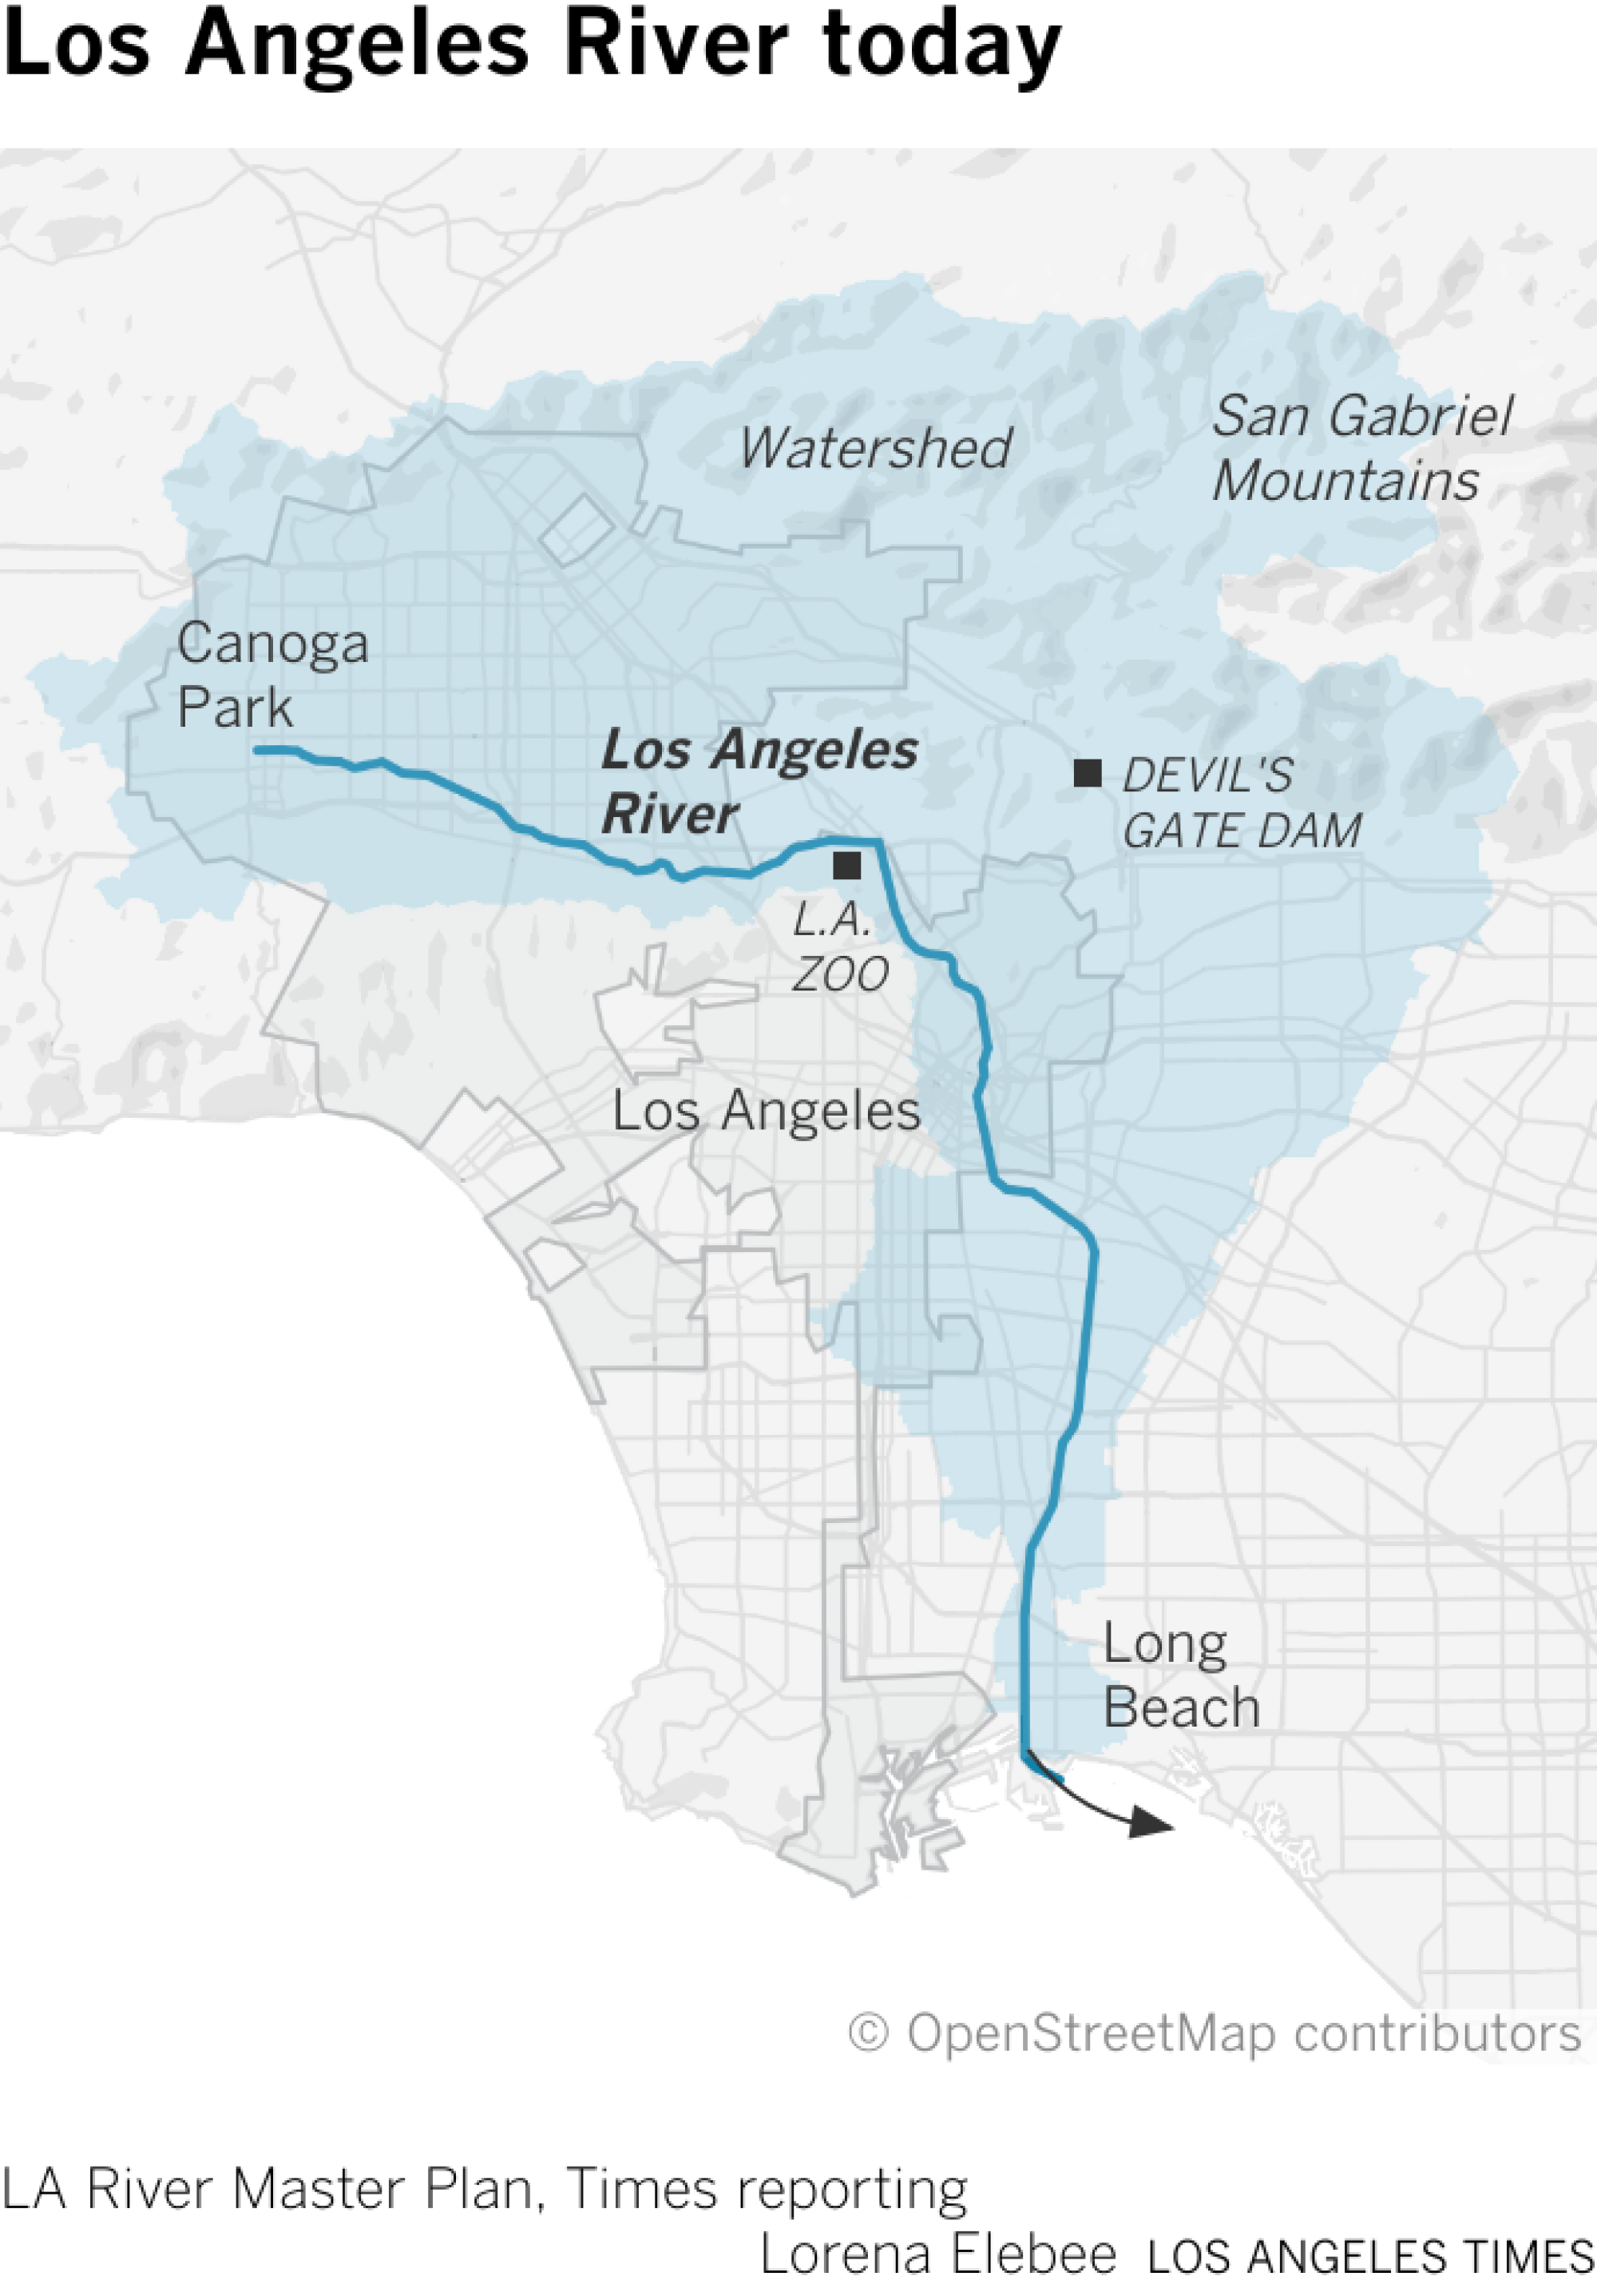 Map show the Los Angeles River today with concrete channel stretching from Los Angeles Zoo through Long Beach.